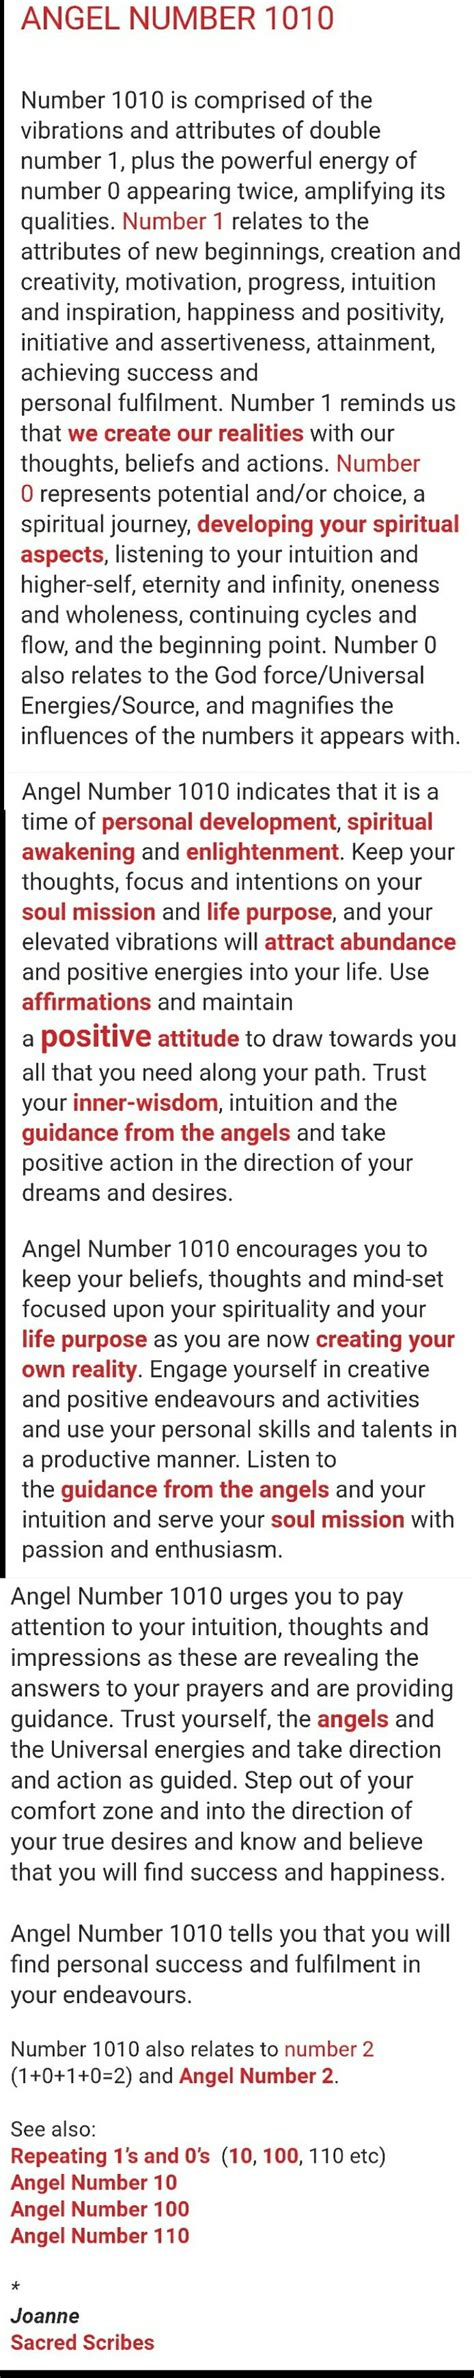 The number 1 is the most positive number, the number of leadership, self sufficiency and new beginnings. 1010 | angel number 1010 | meaning of 10:10 | Numerology ...